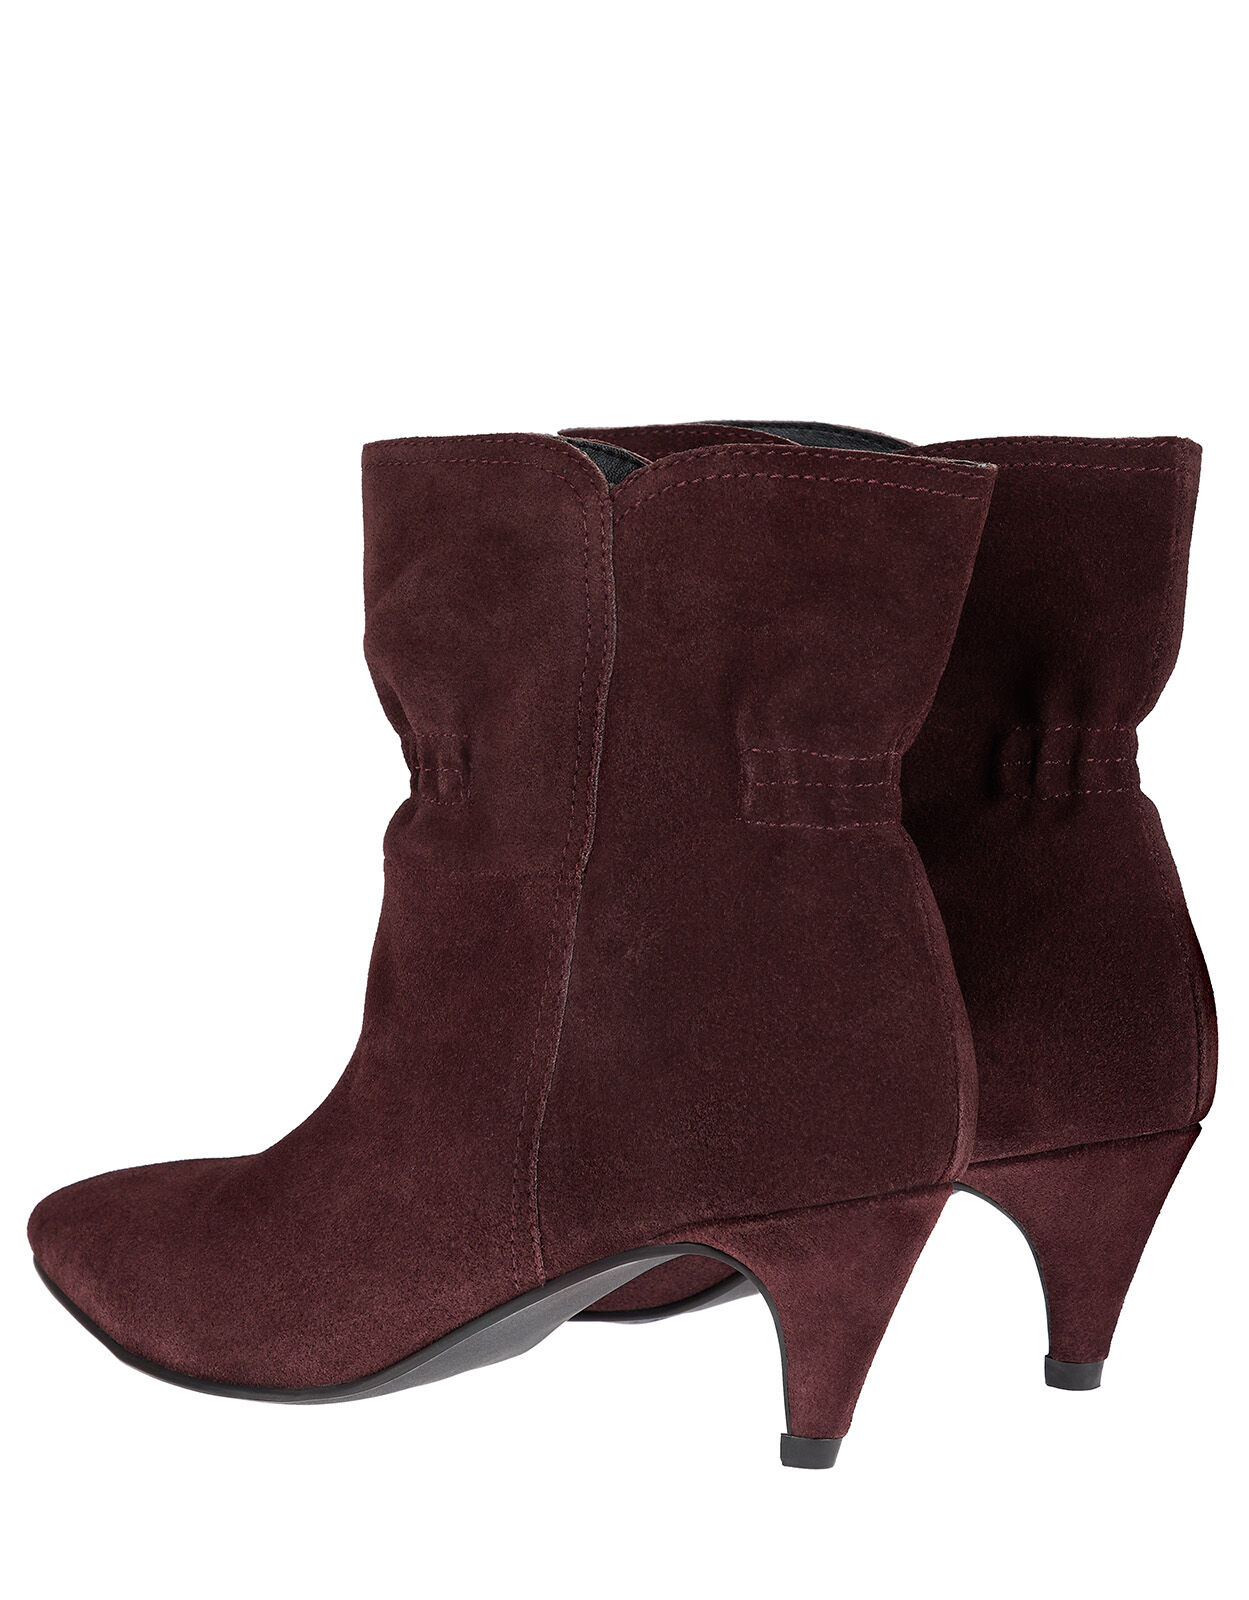 burgundy suede ankle boots uk